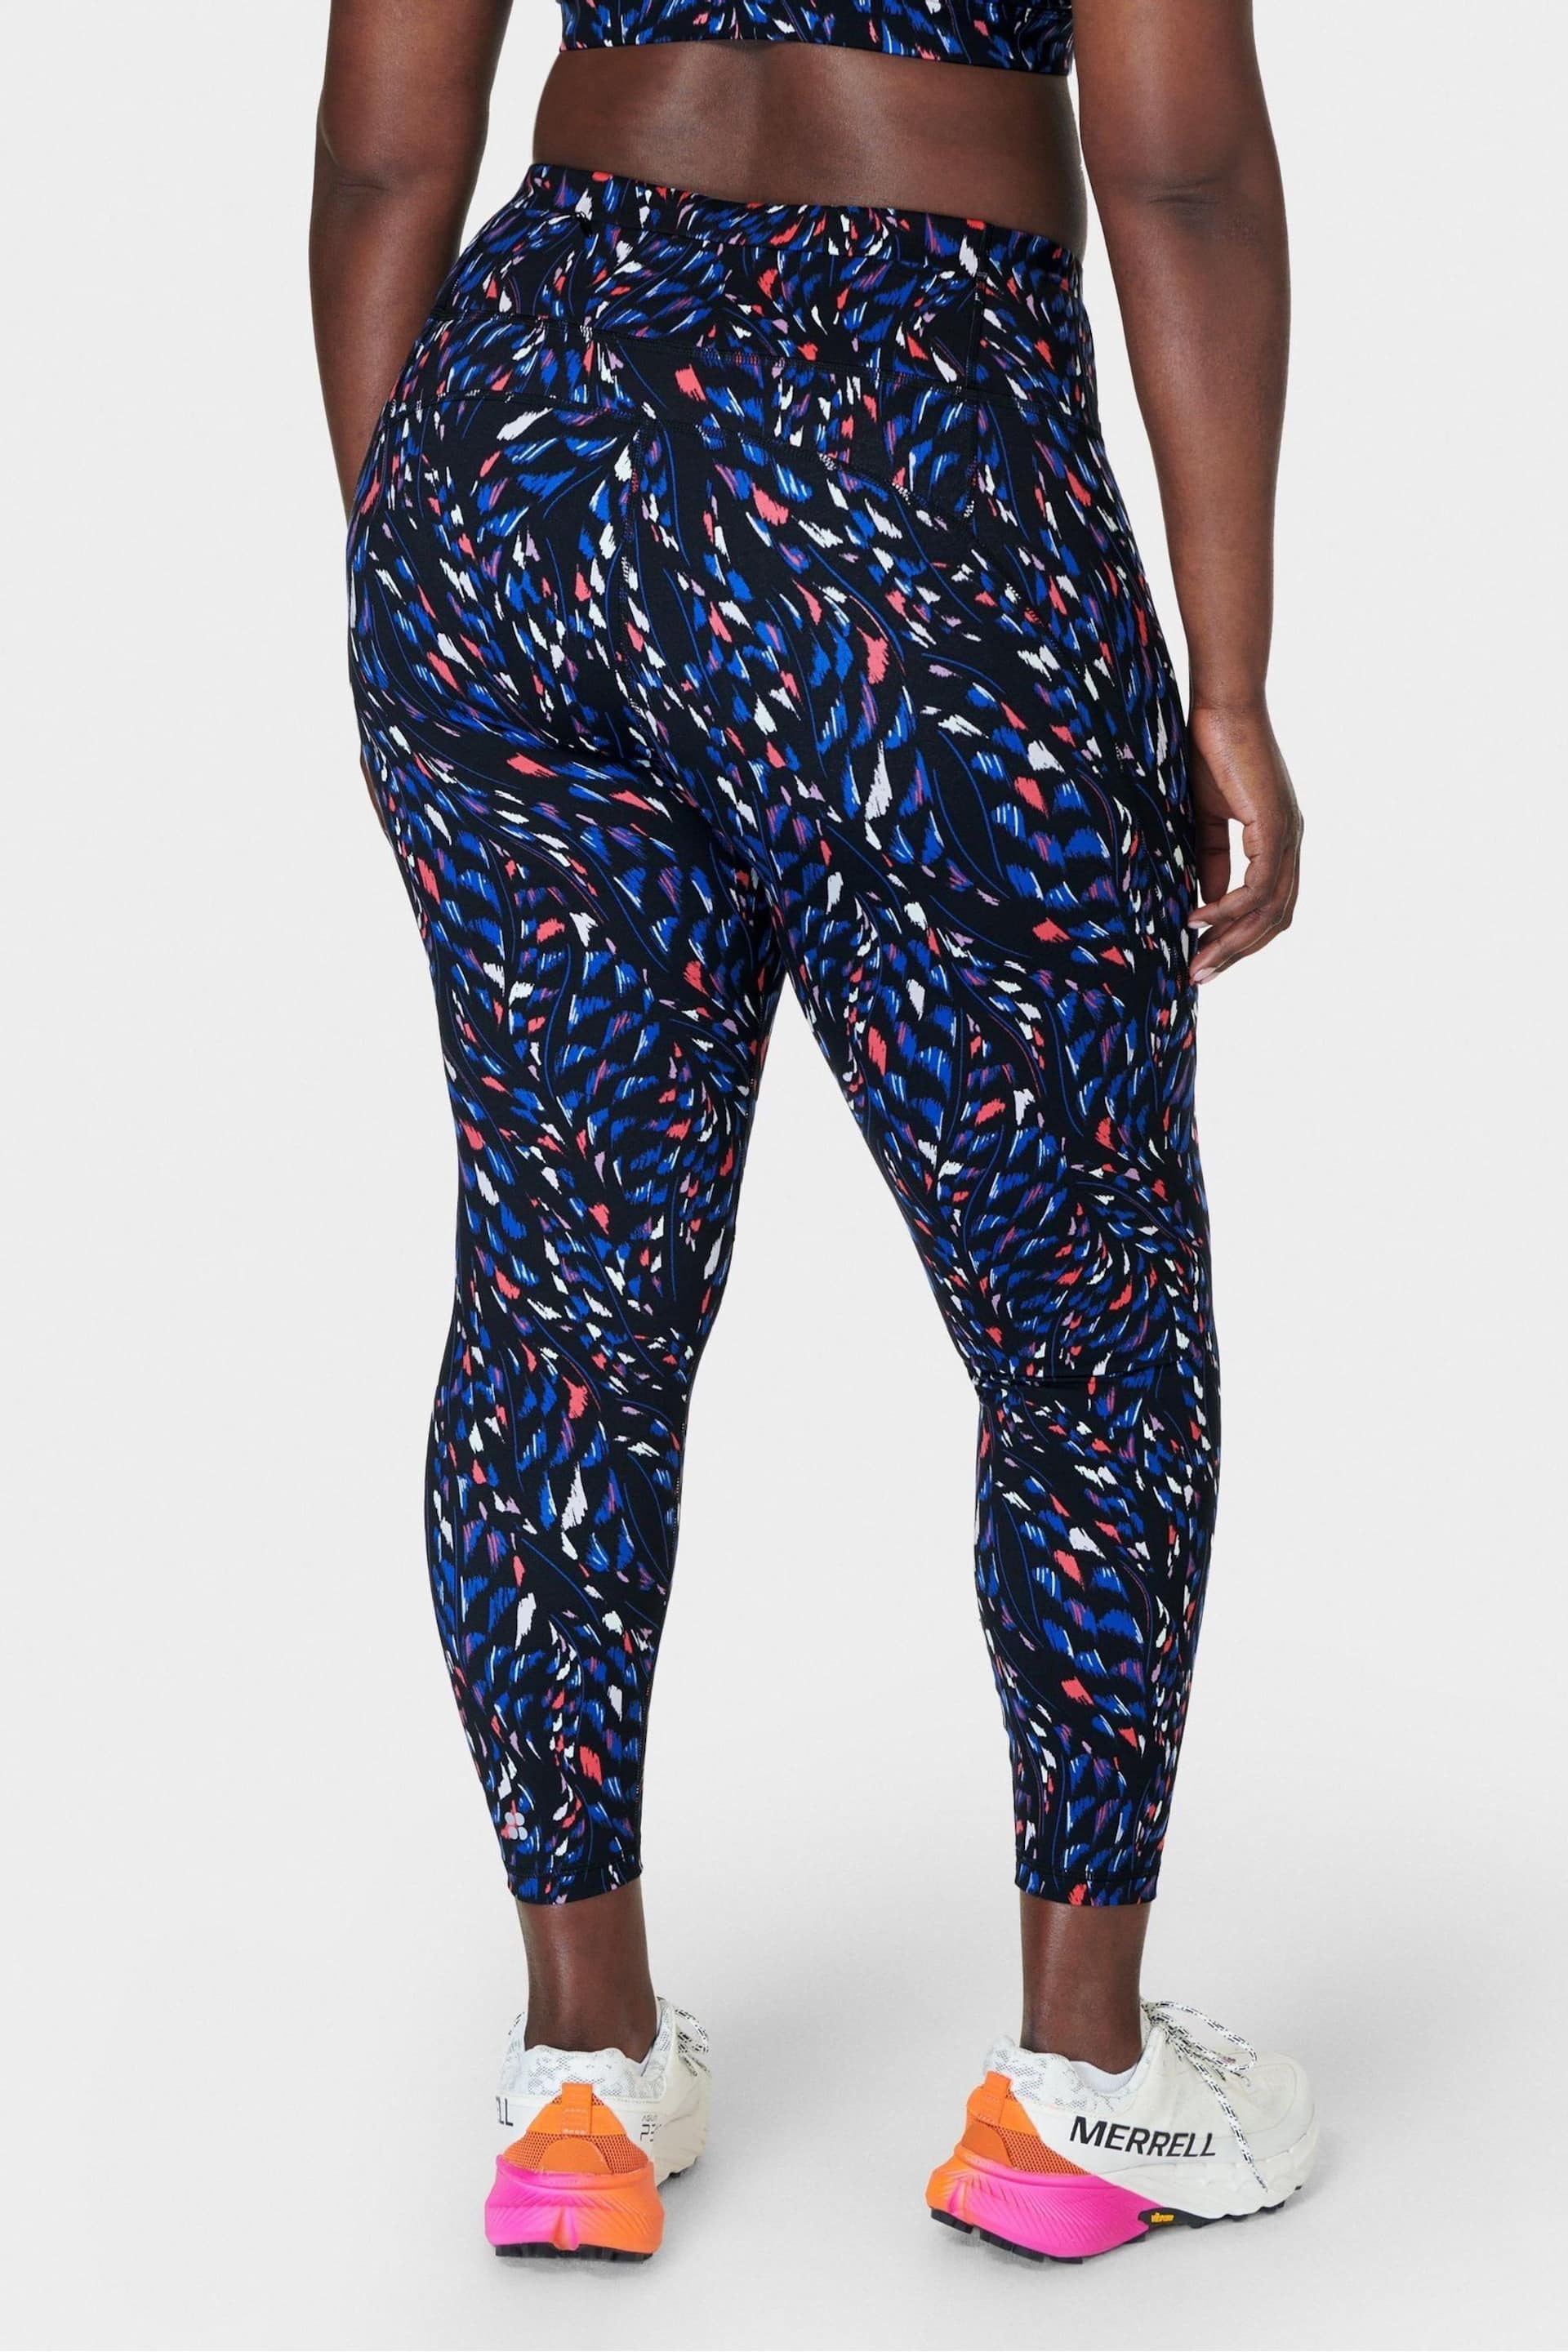 Sweaty Betty Black Coral Texture Print 7/8 Length Aerial Core Workout Leggings - Image 2 of 8